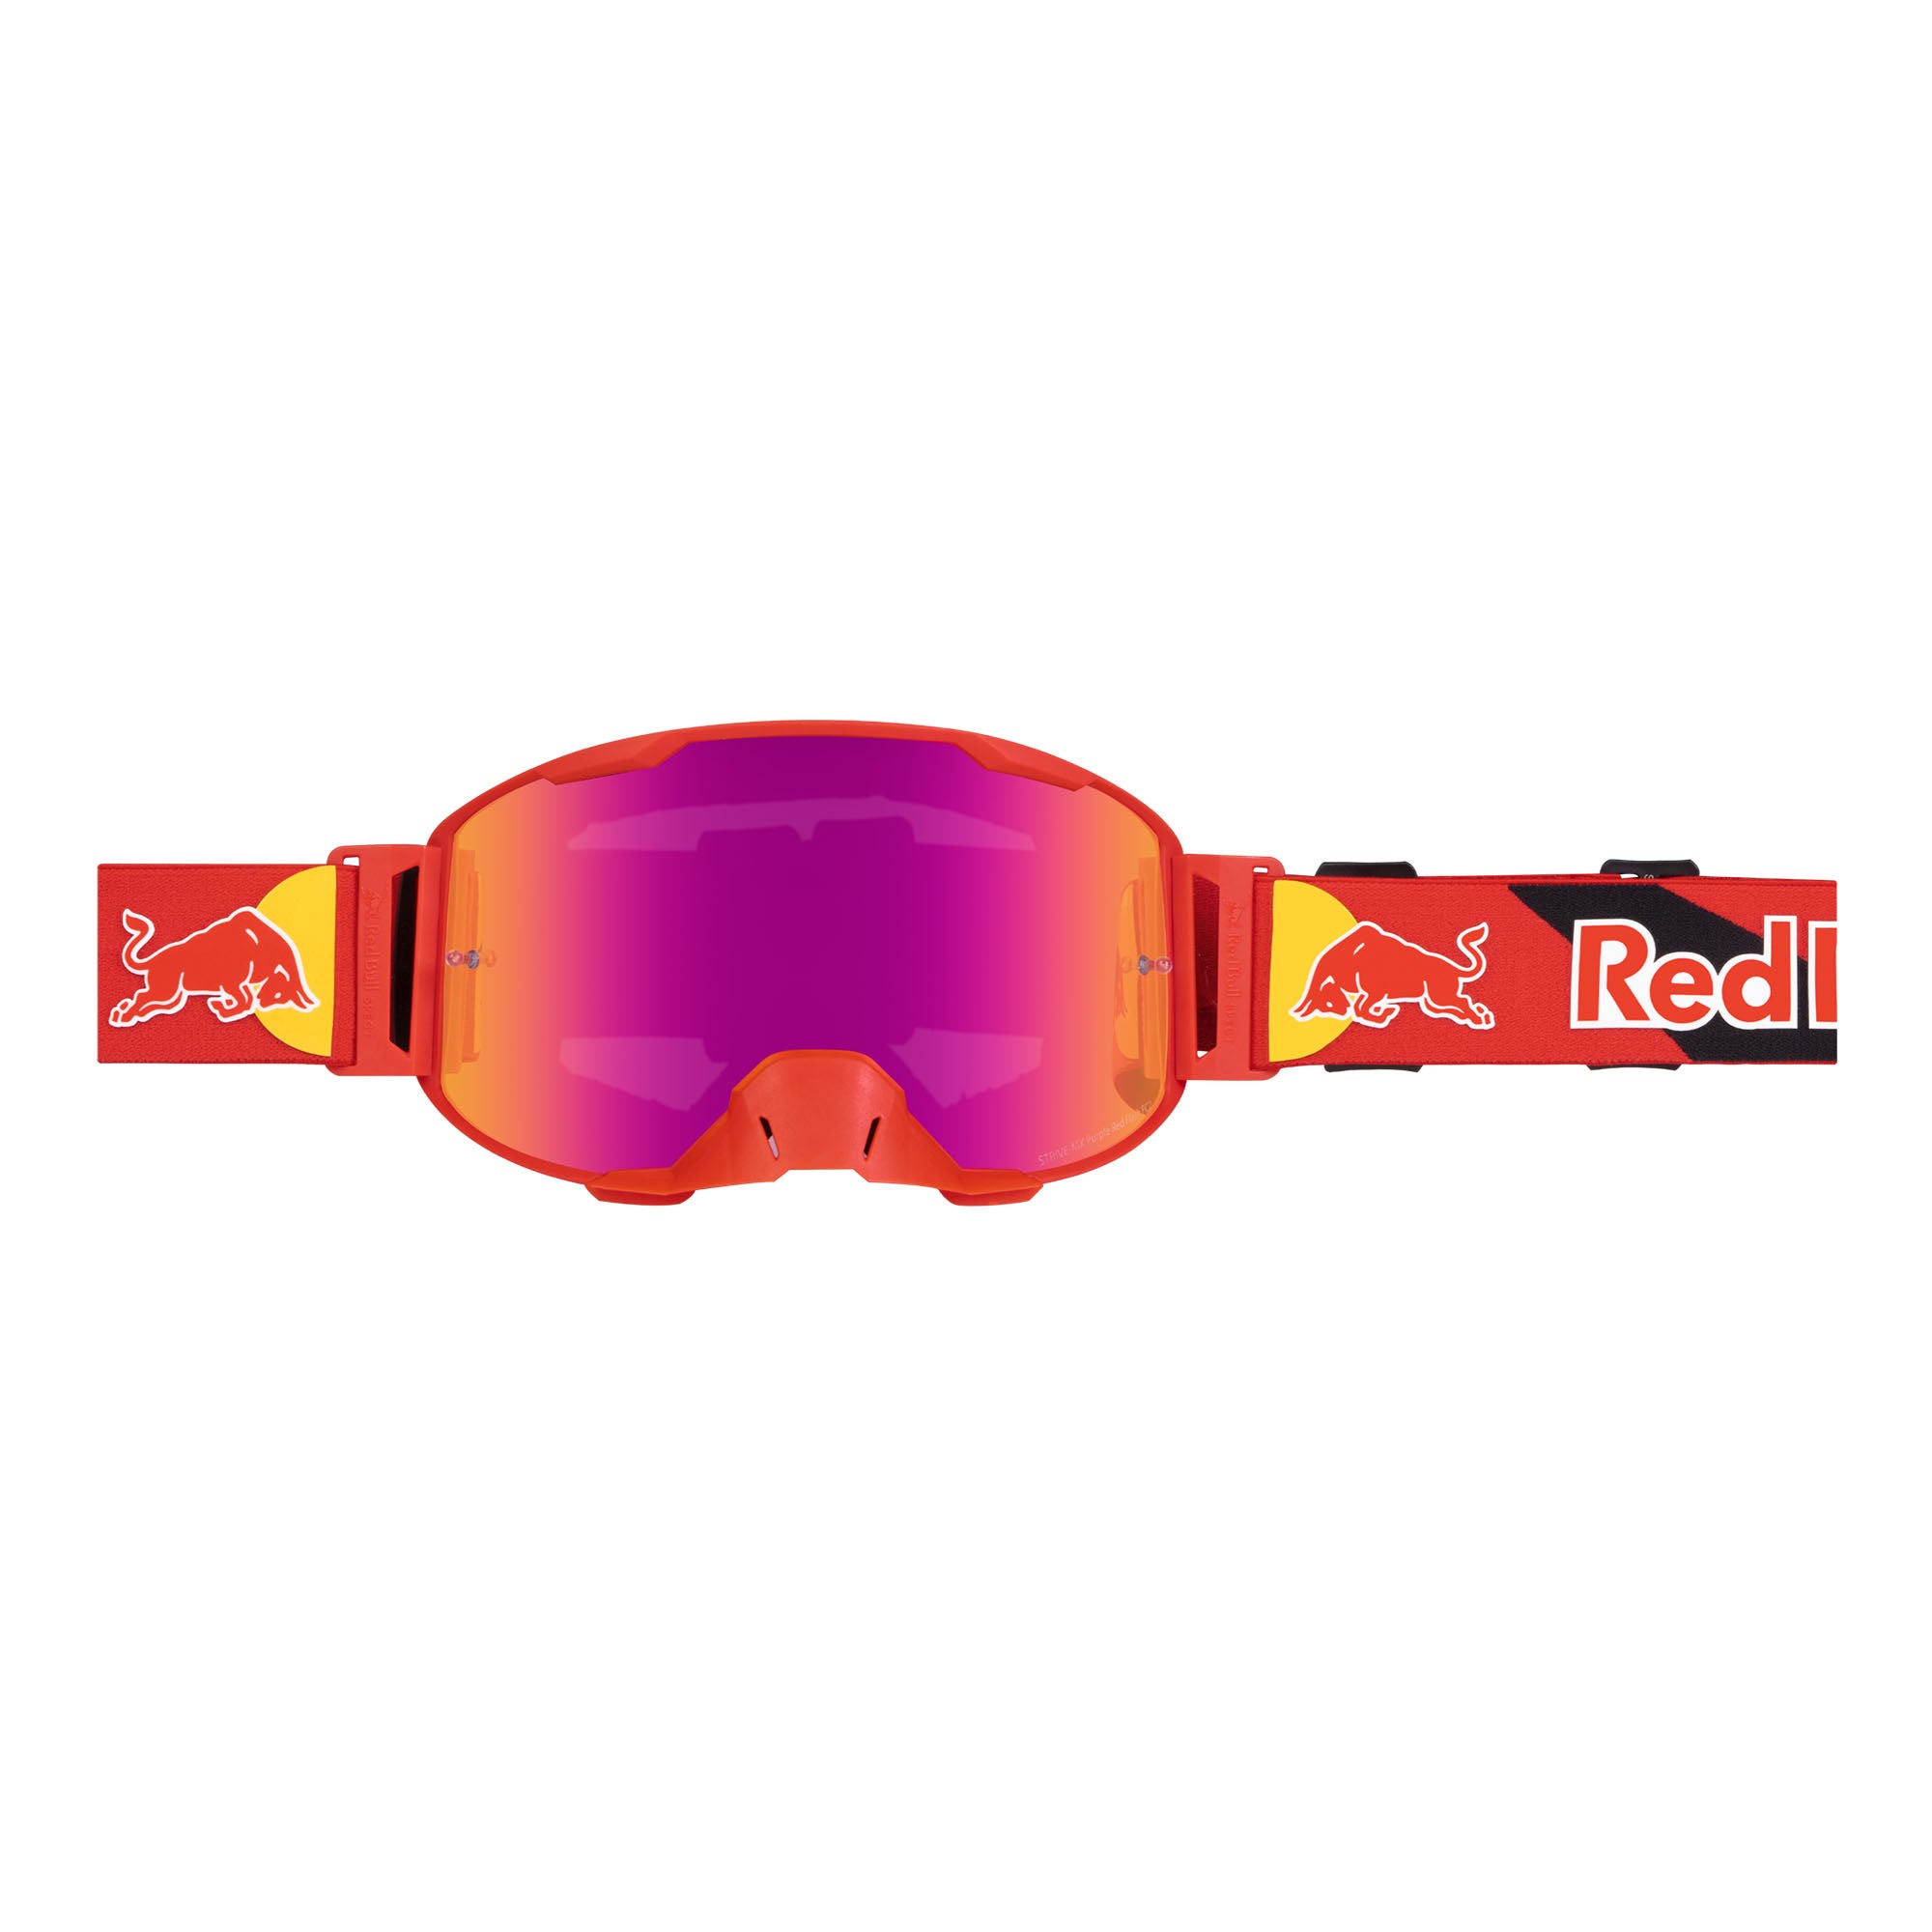 Goggles | Red Bull Shop US